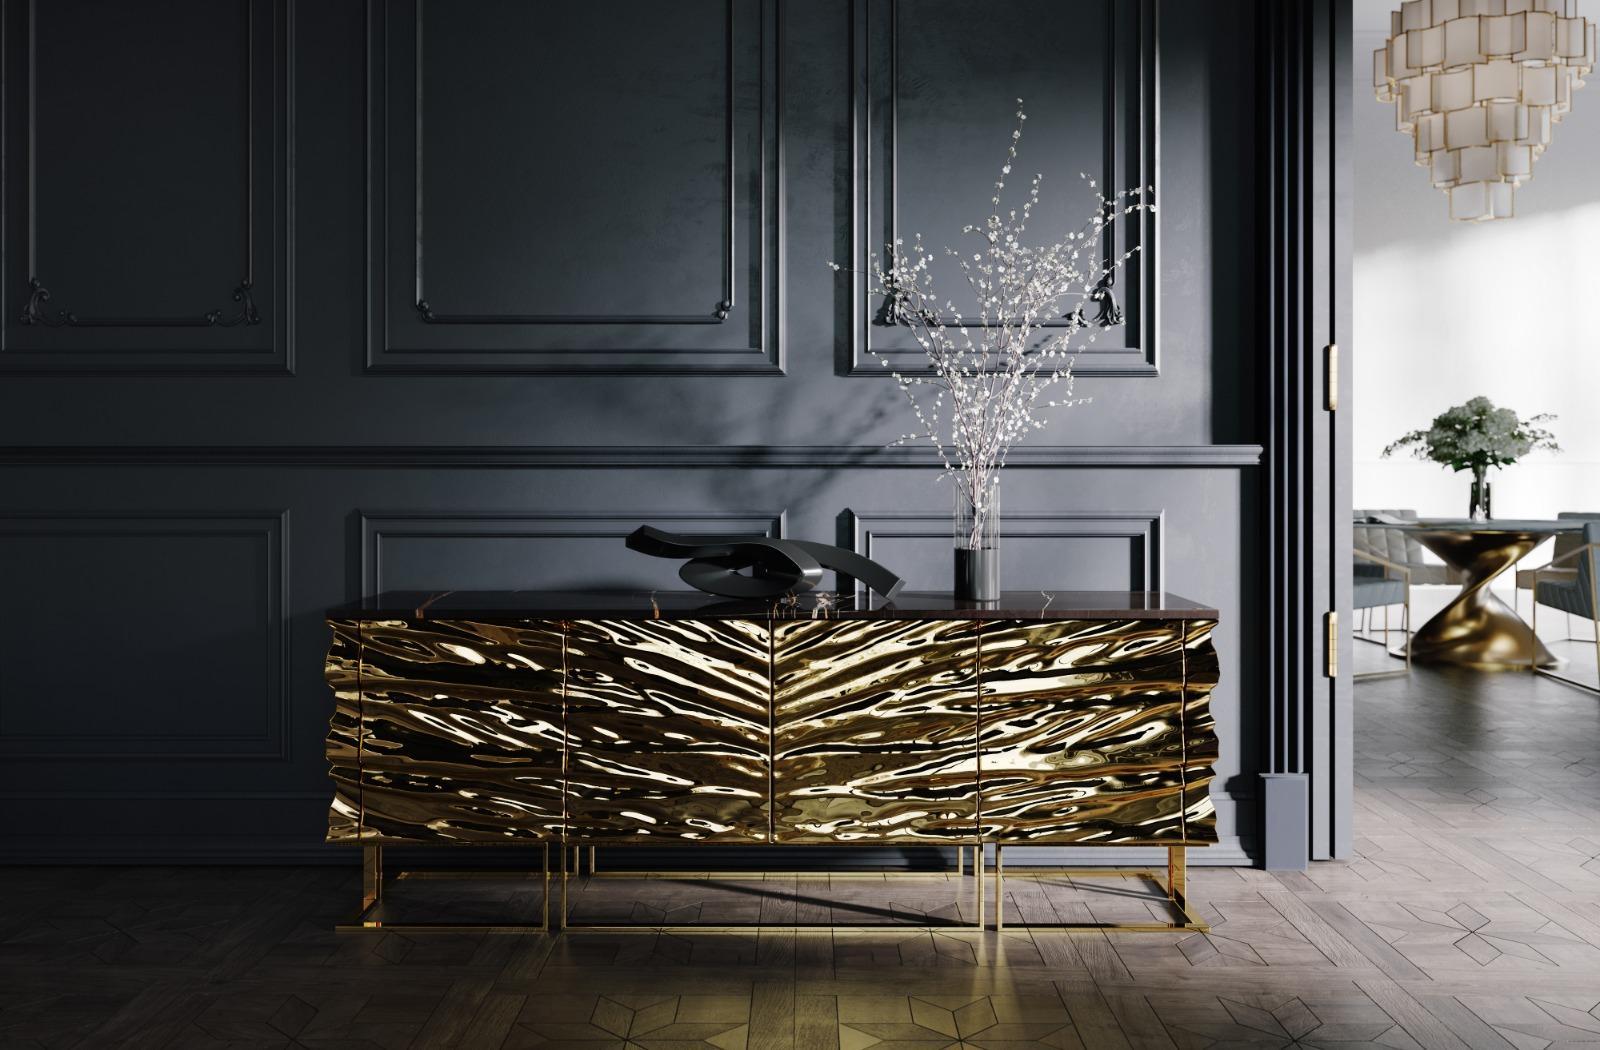 Casse Premium sideboard in metallised leather marble by Mansi London.

Sideboard with an amazing 3D effect with a wave pattern reminiscent of sculptures.
On the top is a slab of natural stone, signed with 24 KT gold plated logo.
The use of